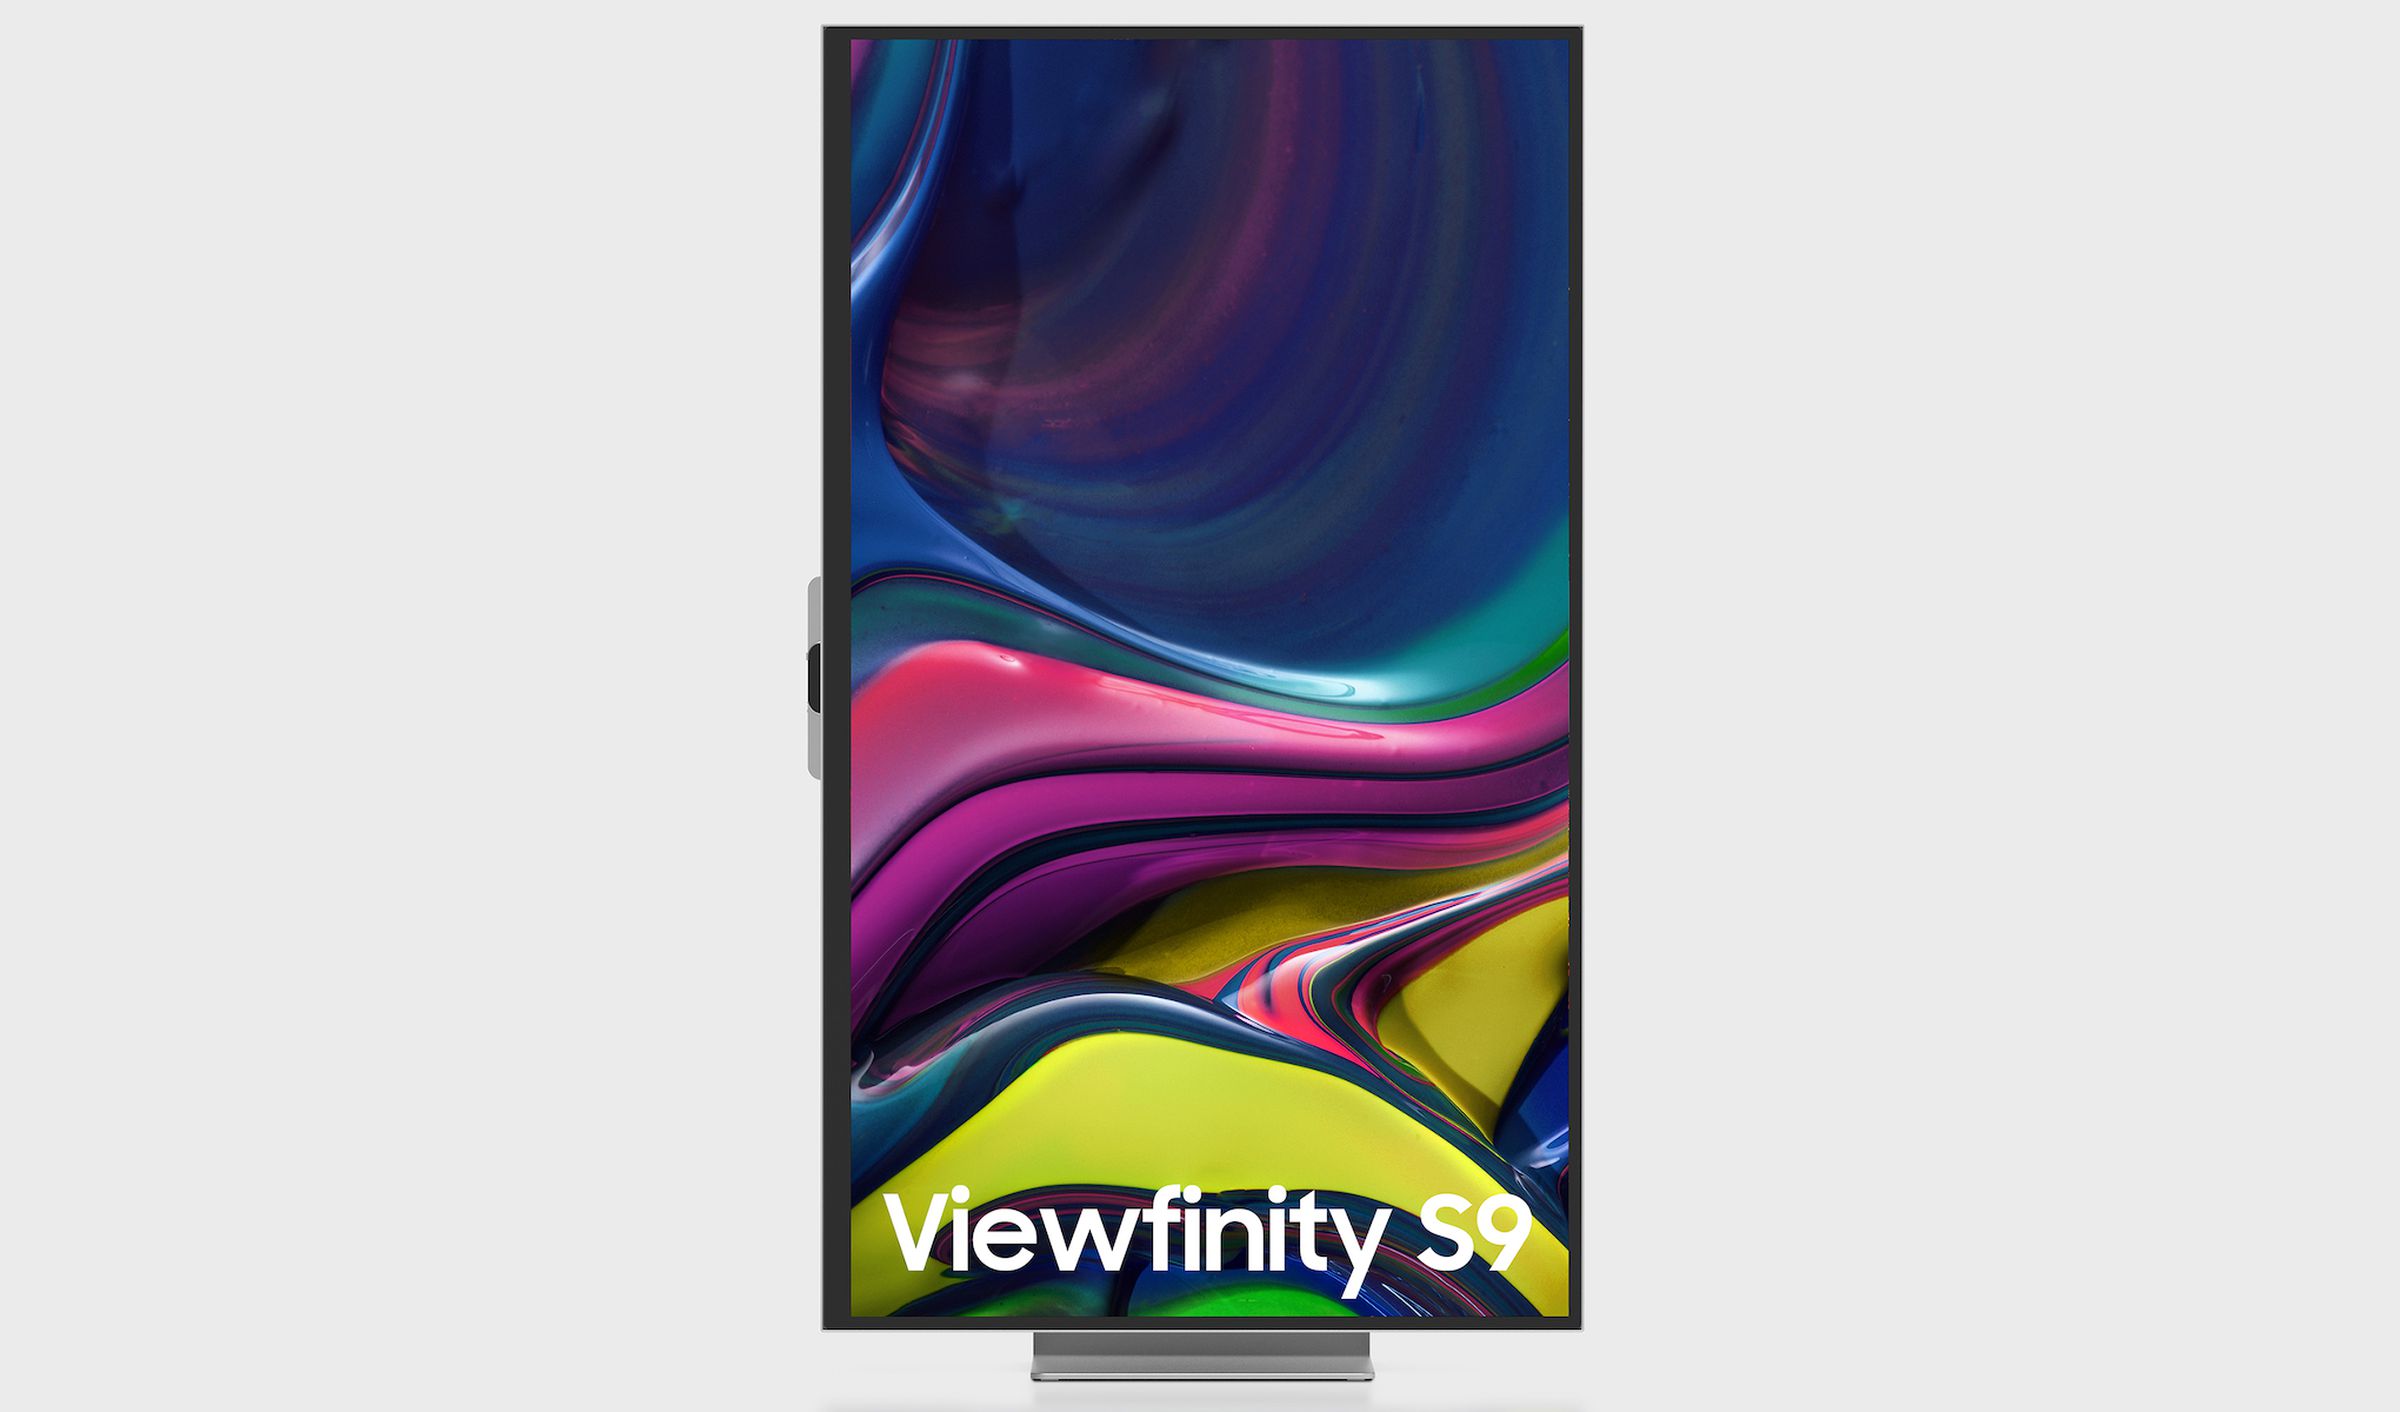 An image of the Samsung View Finity S9 monitor in its portrait orientation.